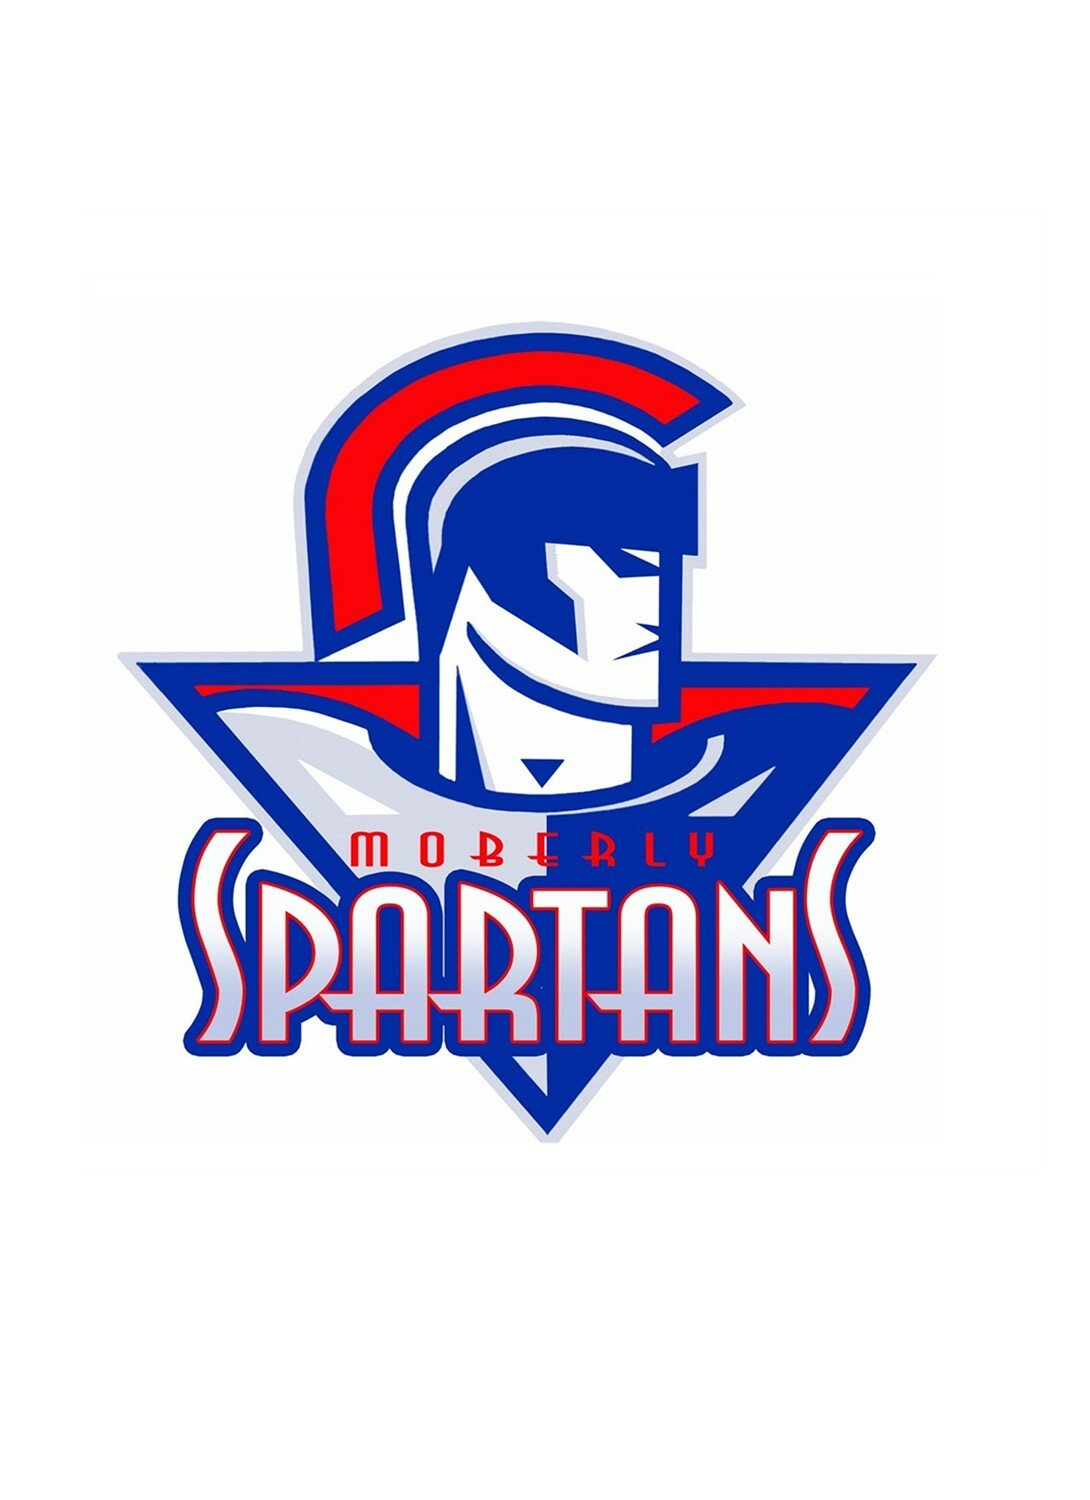 The Moberly Spartan boys and girls soccer teams will conduct a camp on June 5, 6, 8 and 9 at Dr. Larry K. Noel Spartan Stadium.